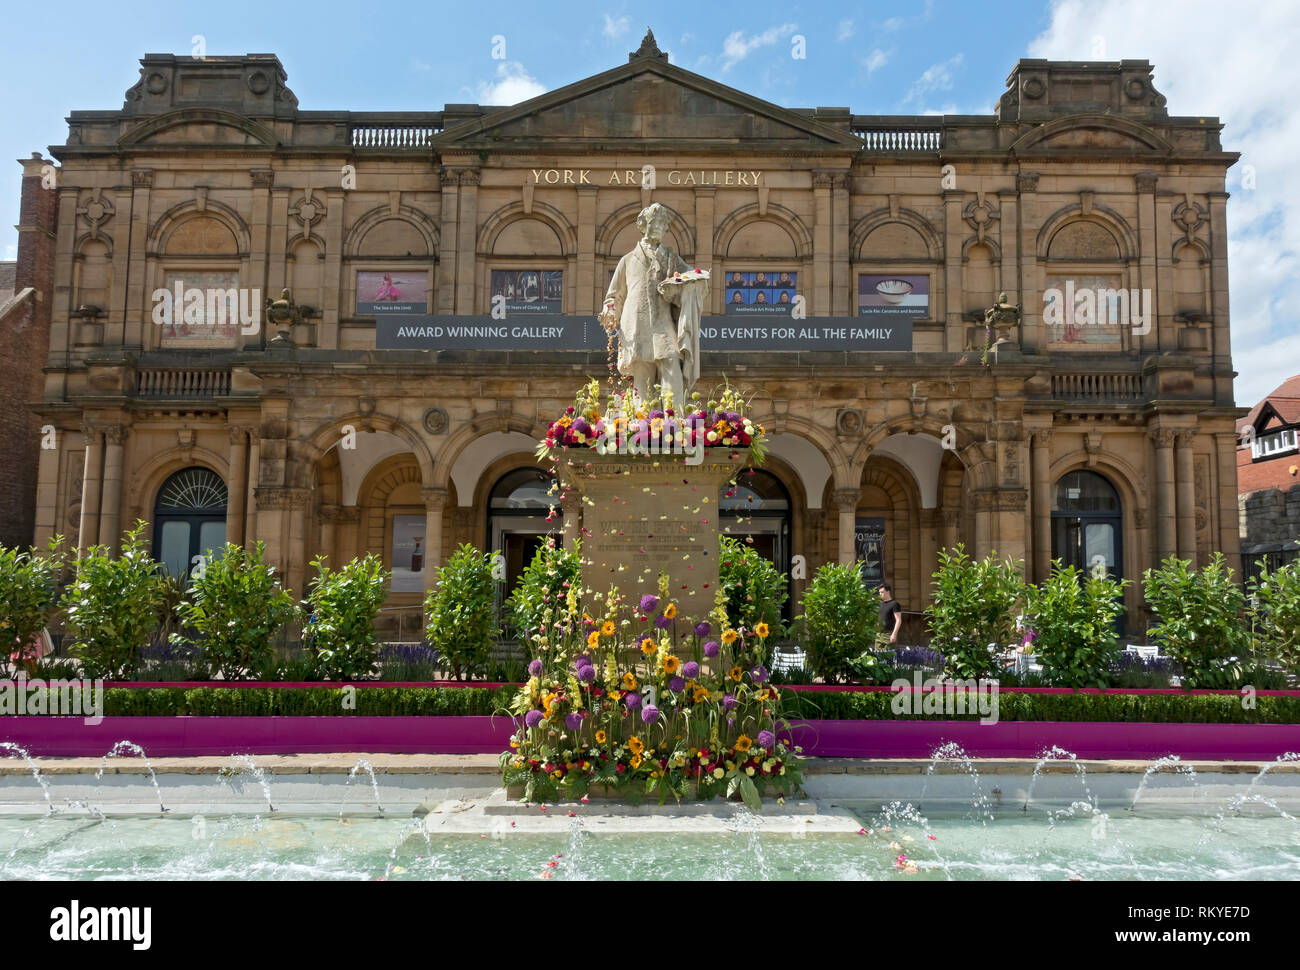 William Etty statue decorated with flowers for the Bloom Festival Exhibition Square. Stock Photo